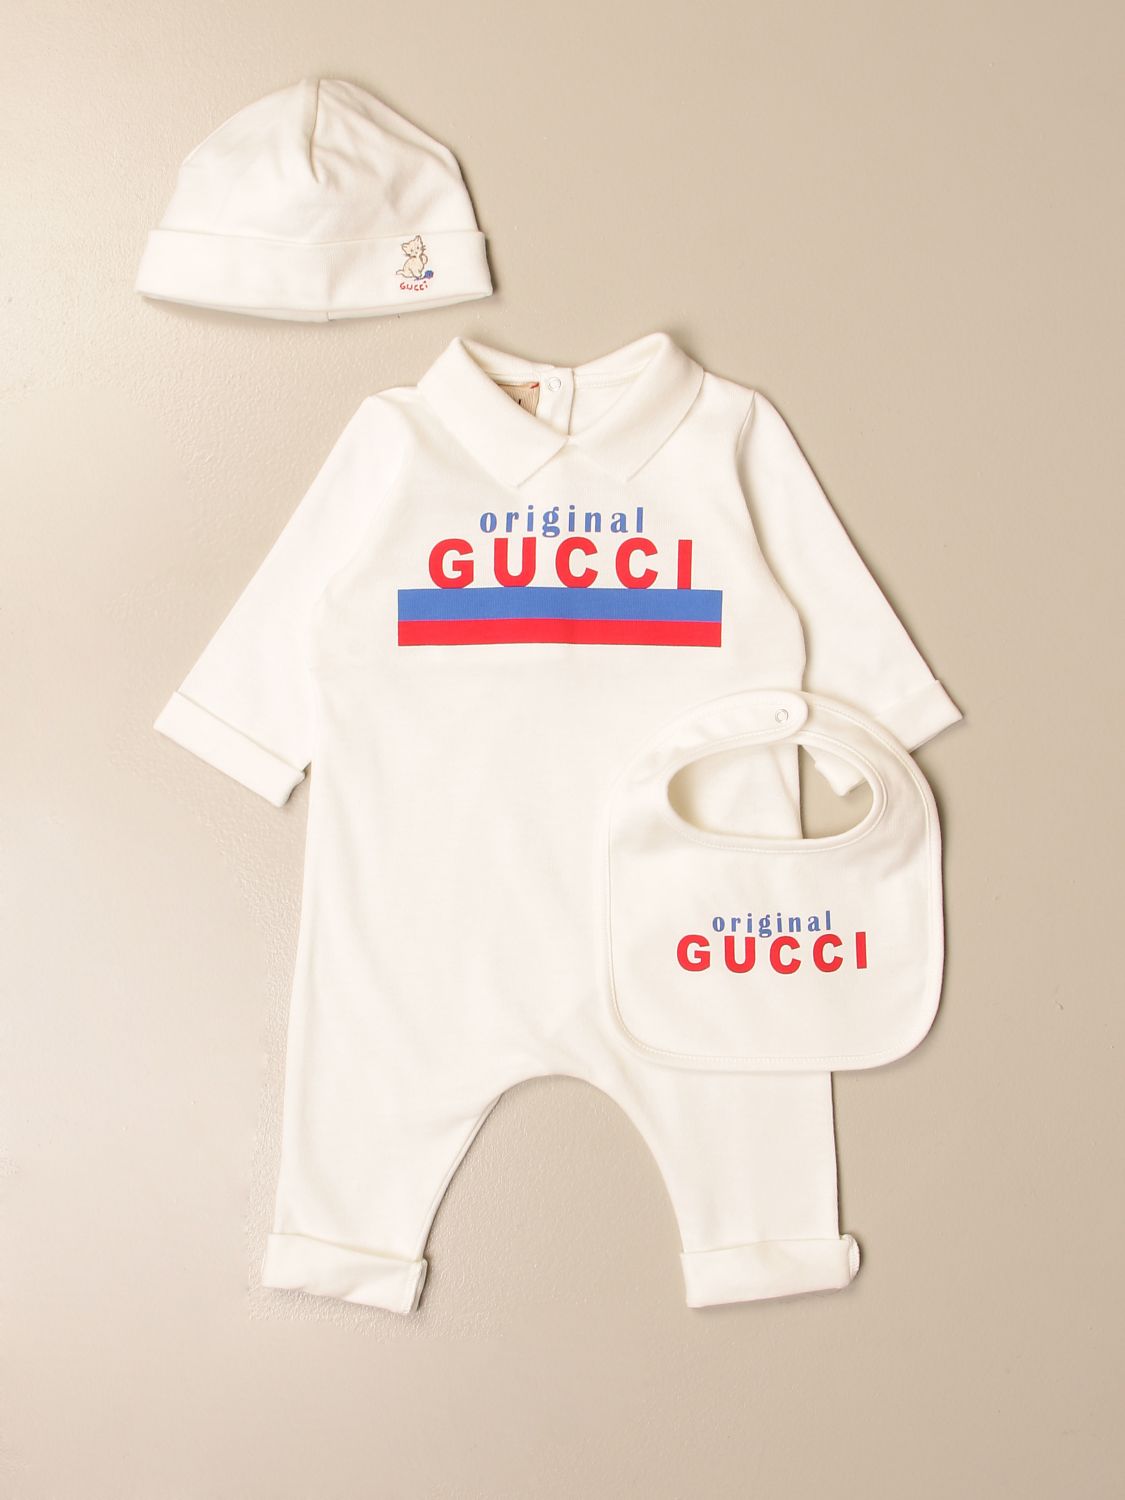 Pack Gucci: Pack kinder Gucci milch 1